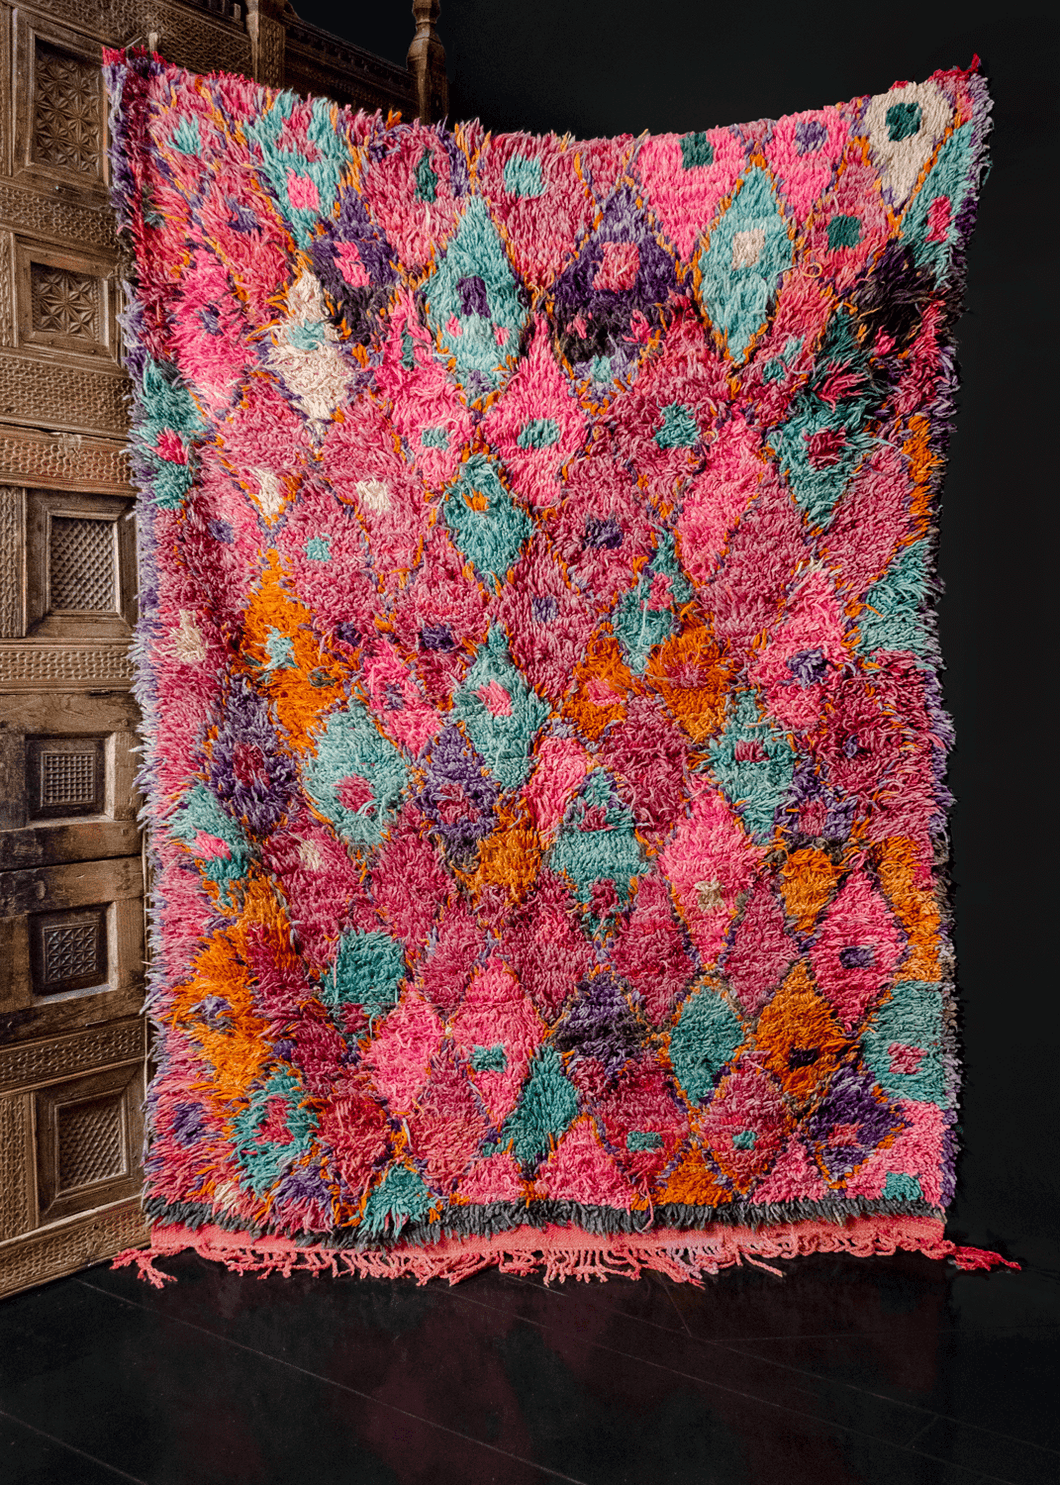 Mid century Moroccan Beni rug. Borderless design composed of diamonds woven in a bright multicolor palette of bright pink, teal and burst of orange, purple and ivory. 